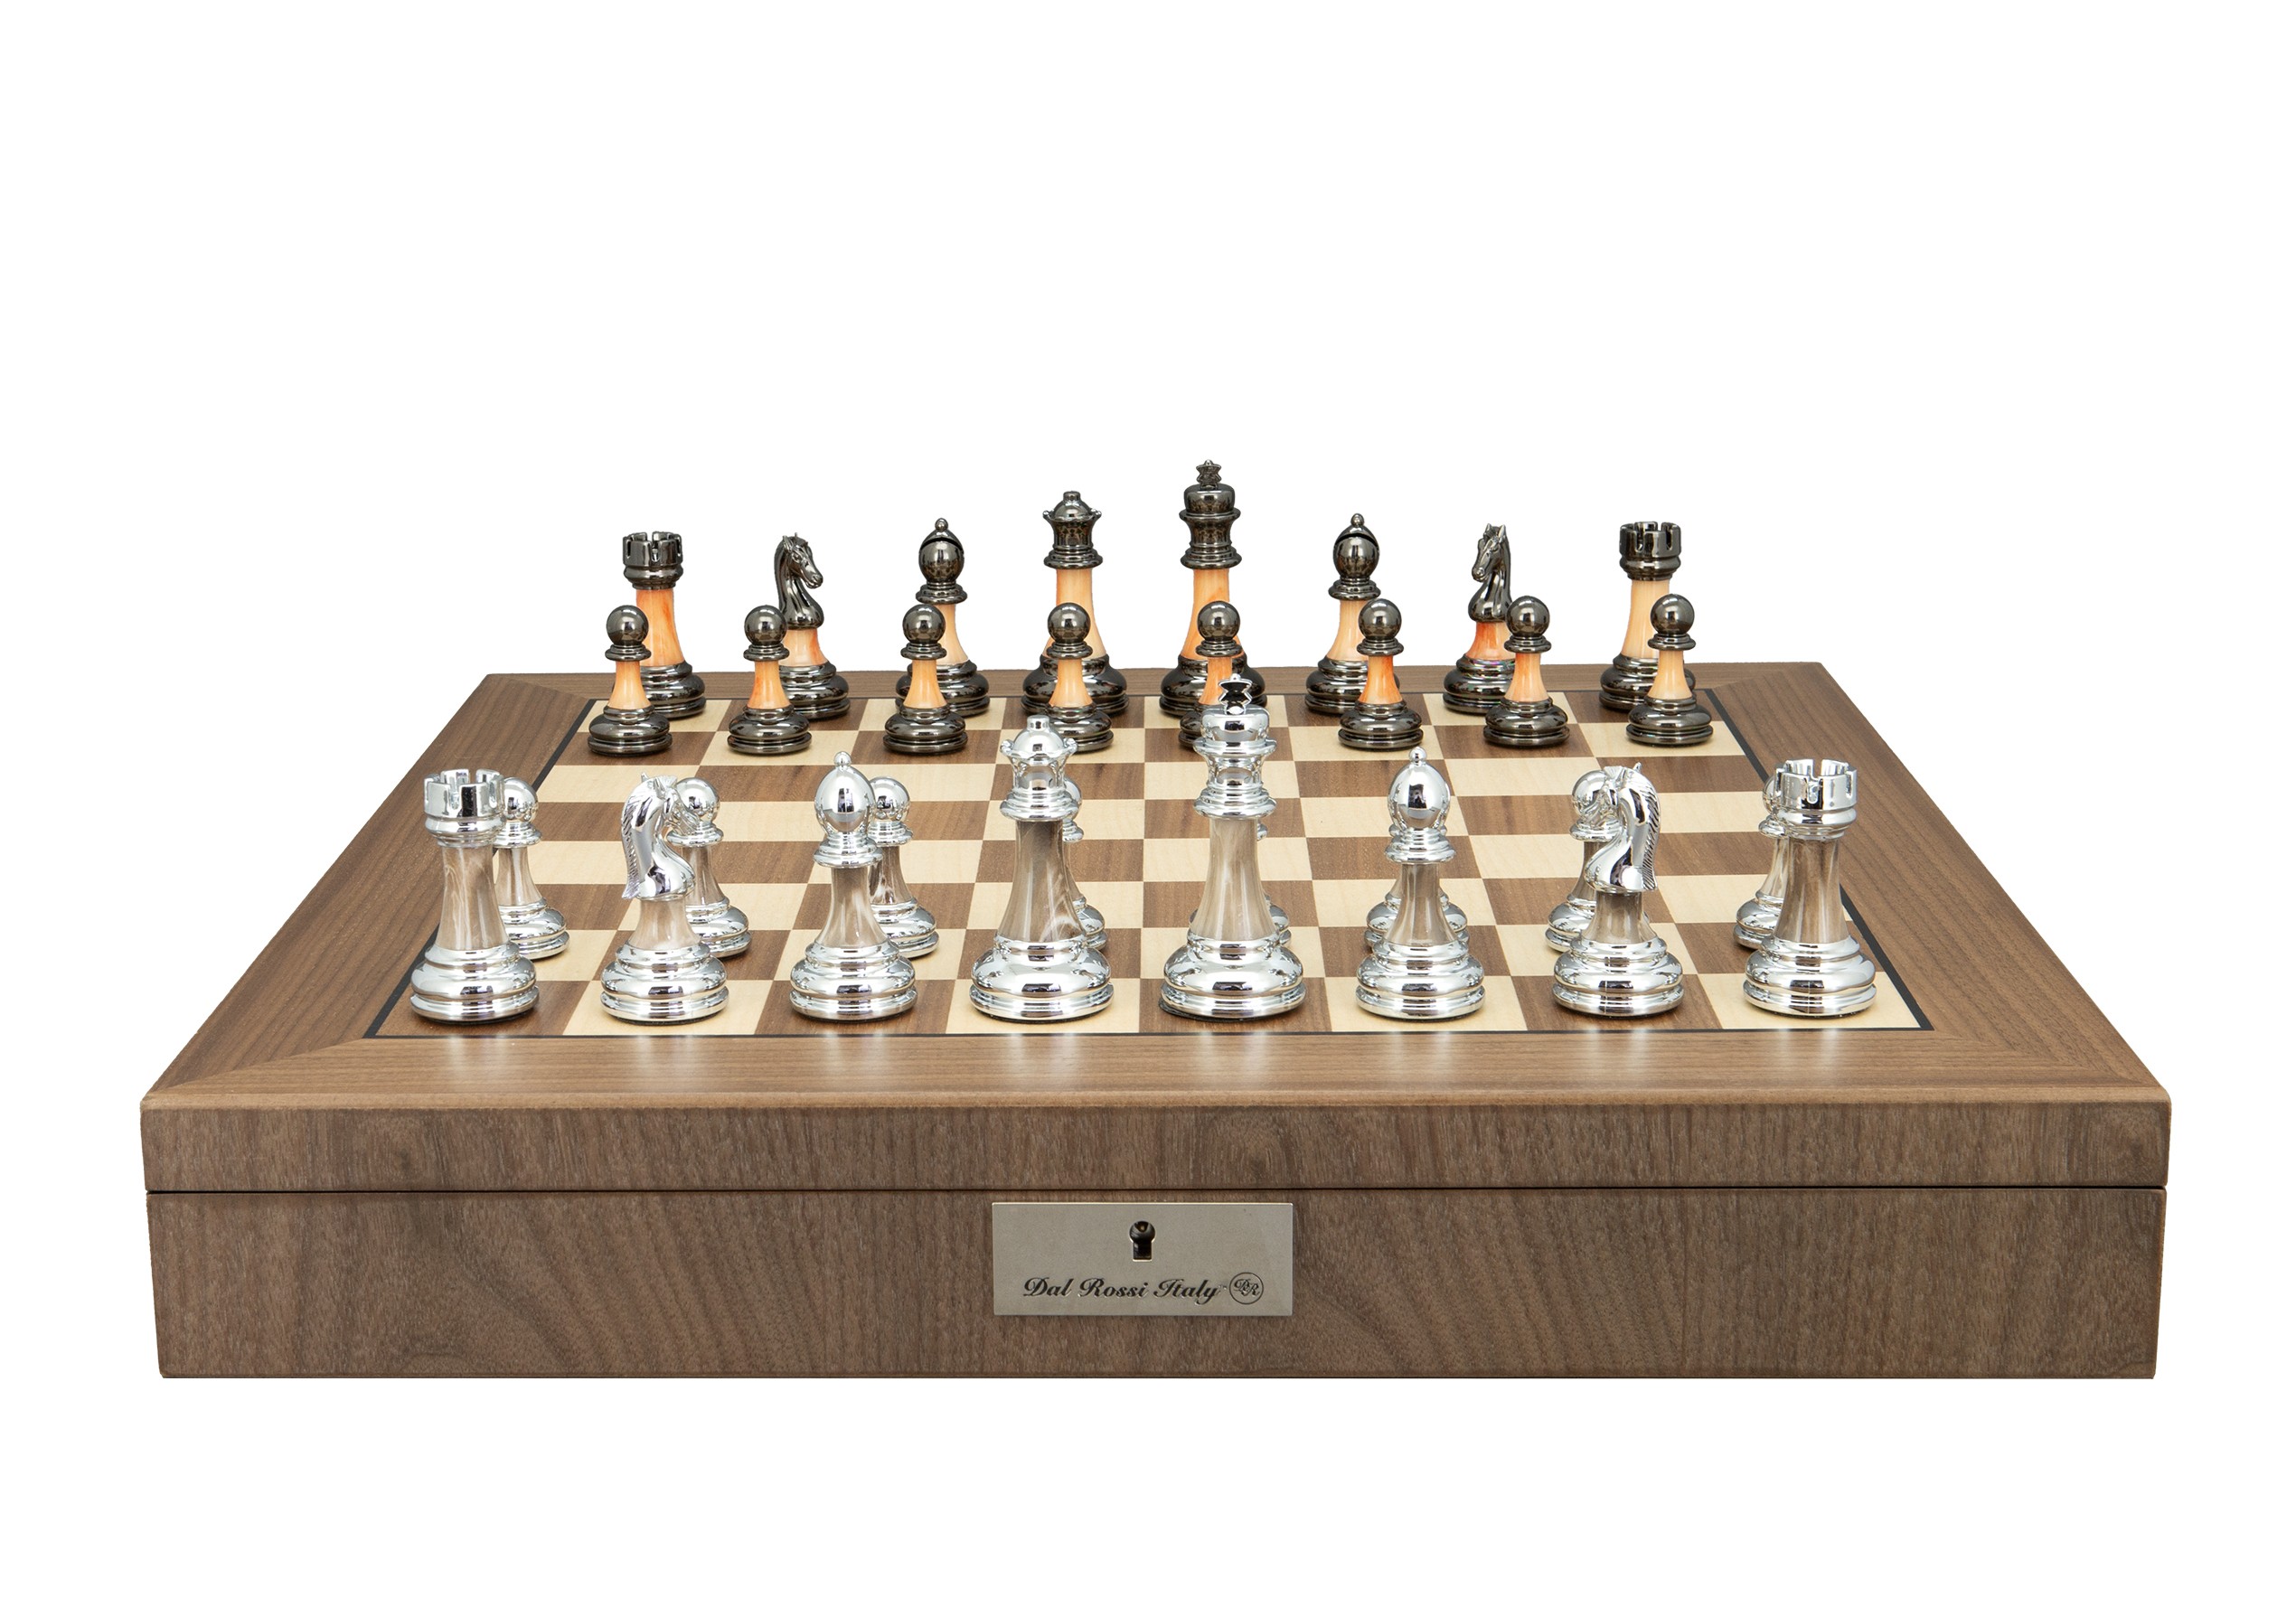 Dal Rossi Italy, Staunton Metal/Marble Finish Chessmen on a Walnut Inlaid Chess Box with Compartments 20"